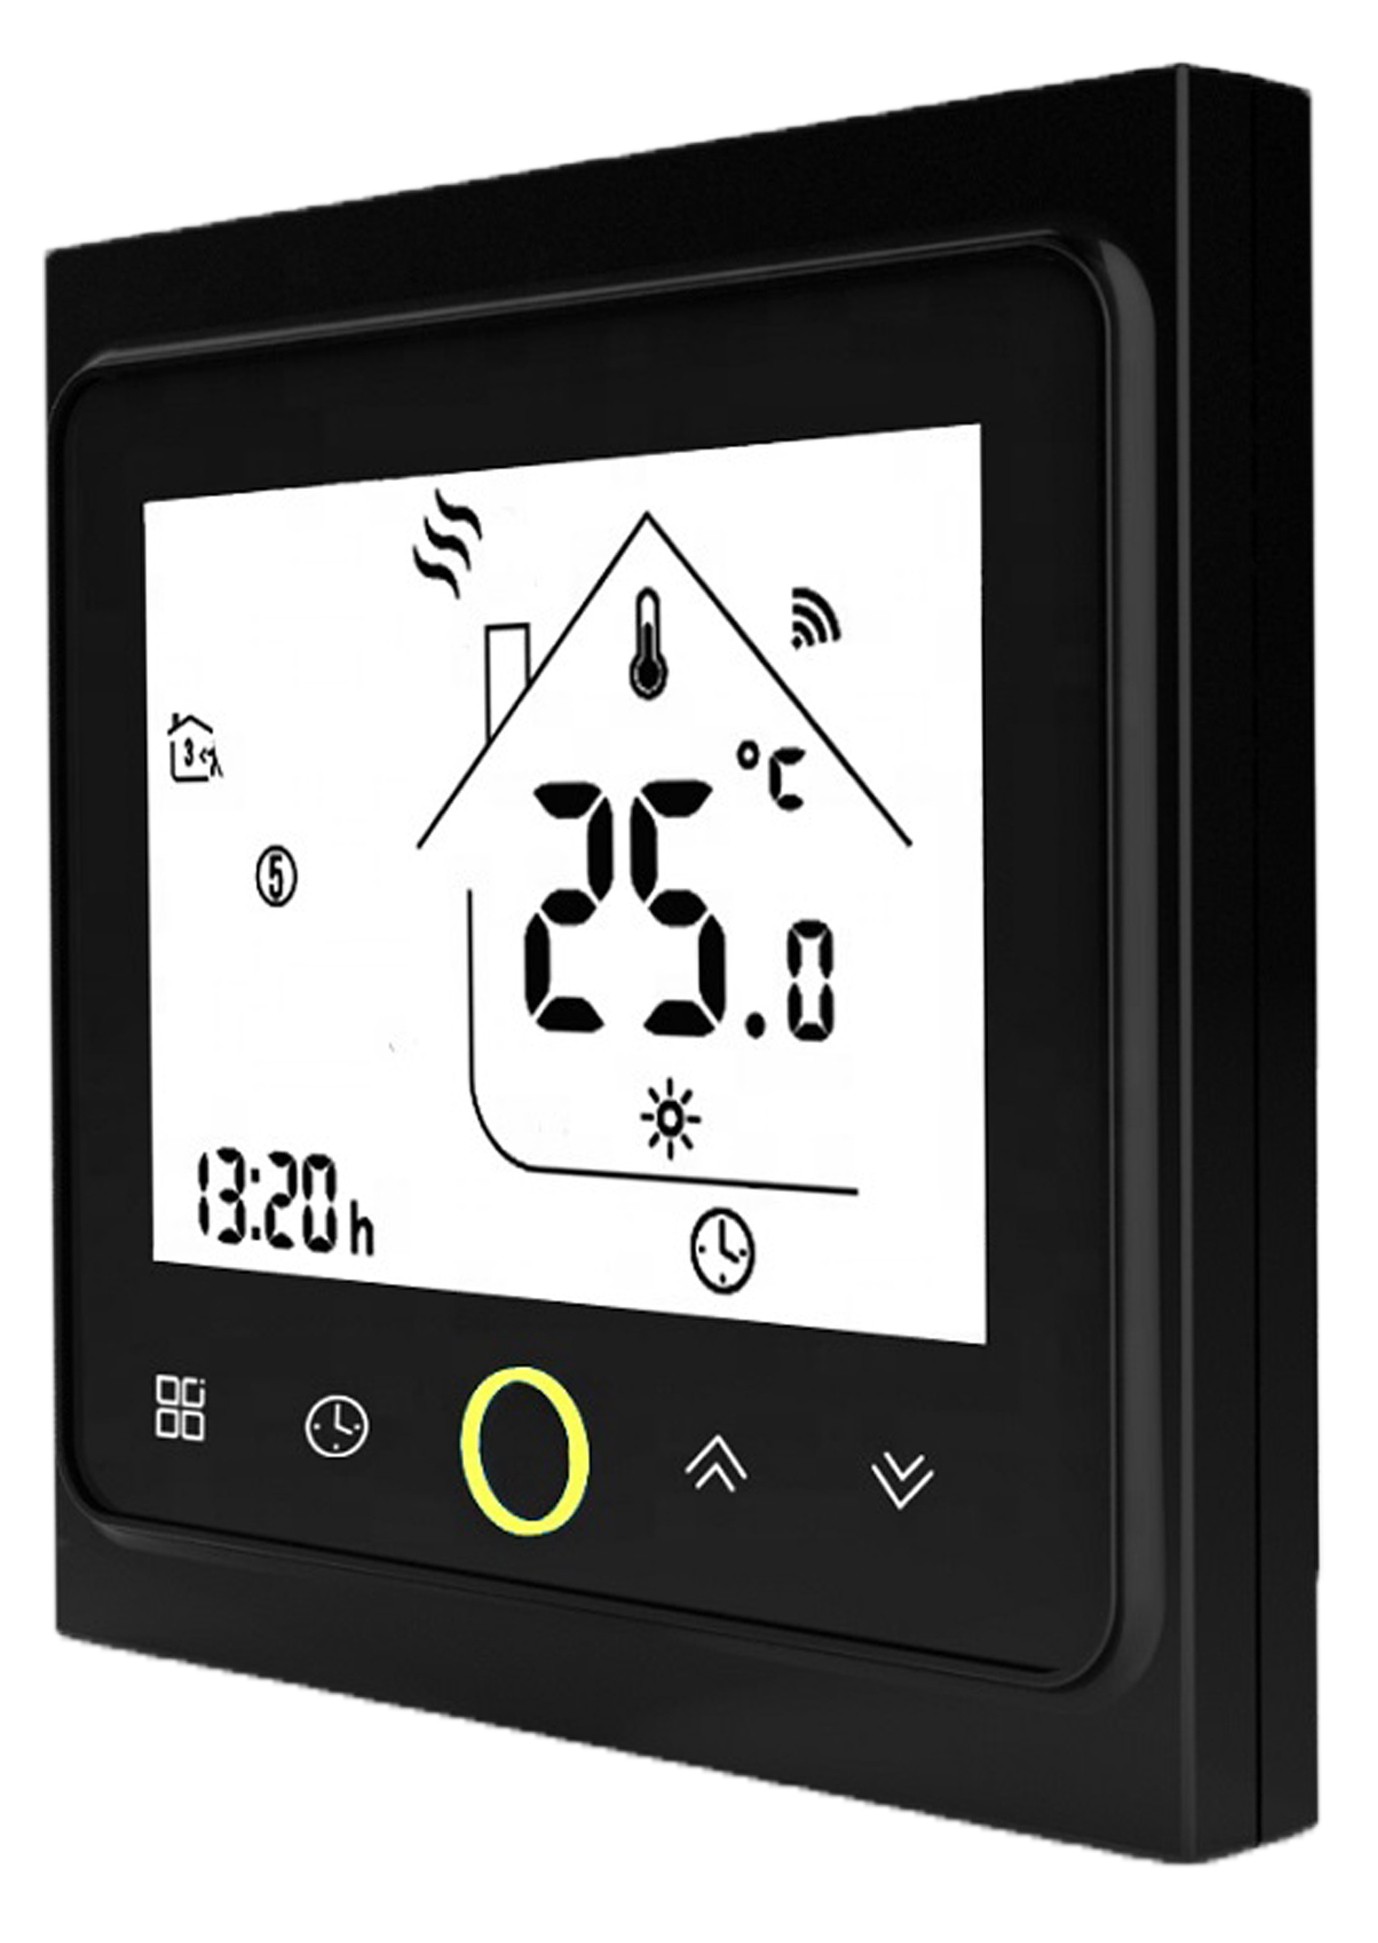 Tervix Pro Line WiFi Thermostat (114130)